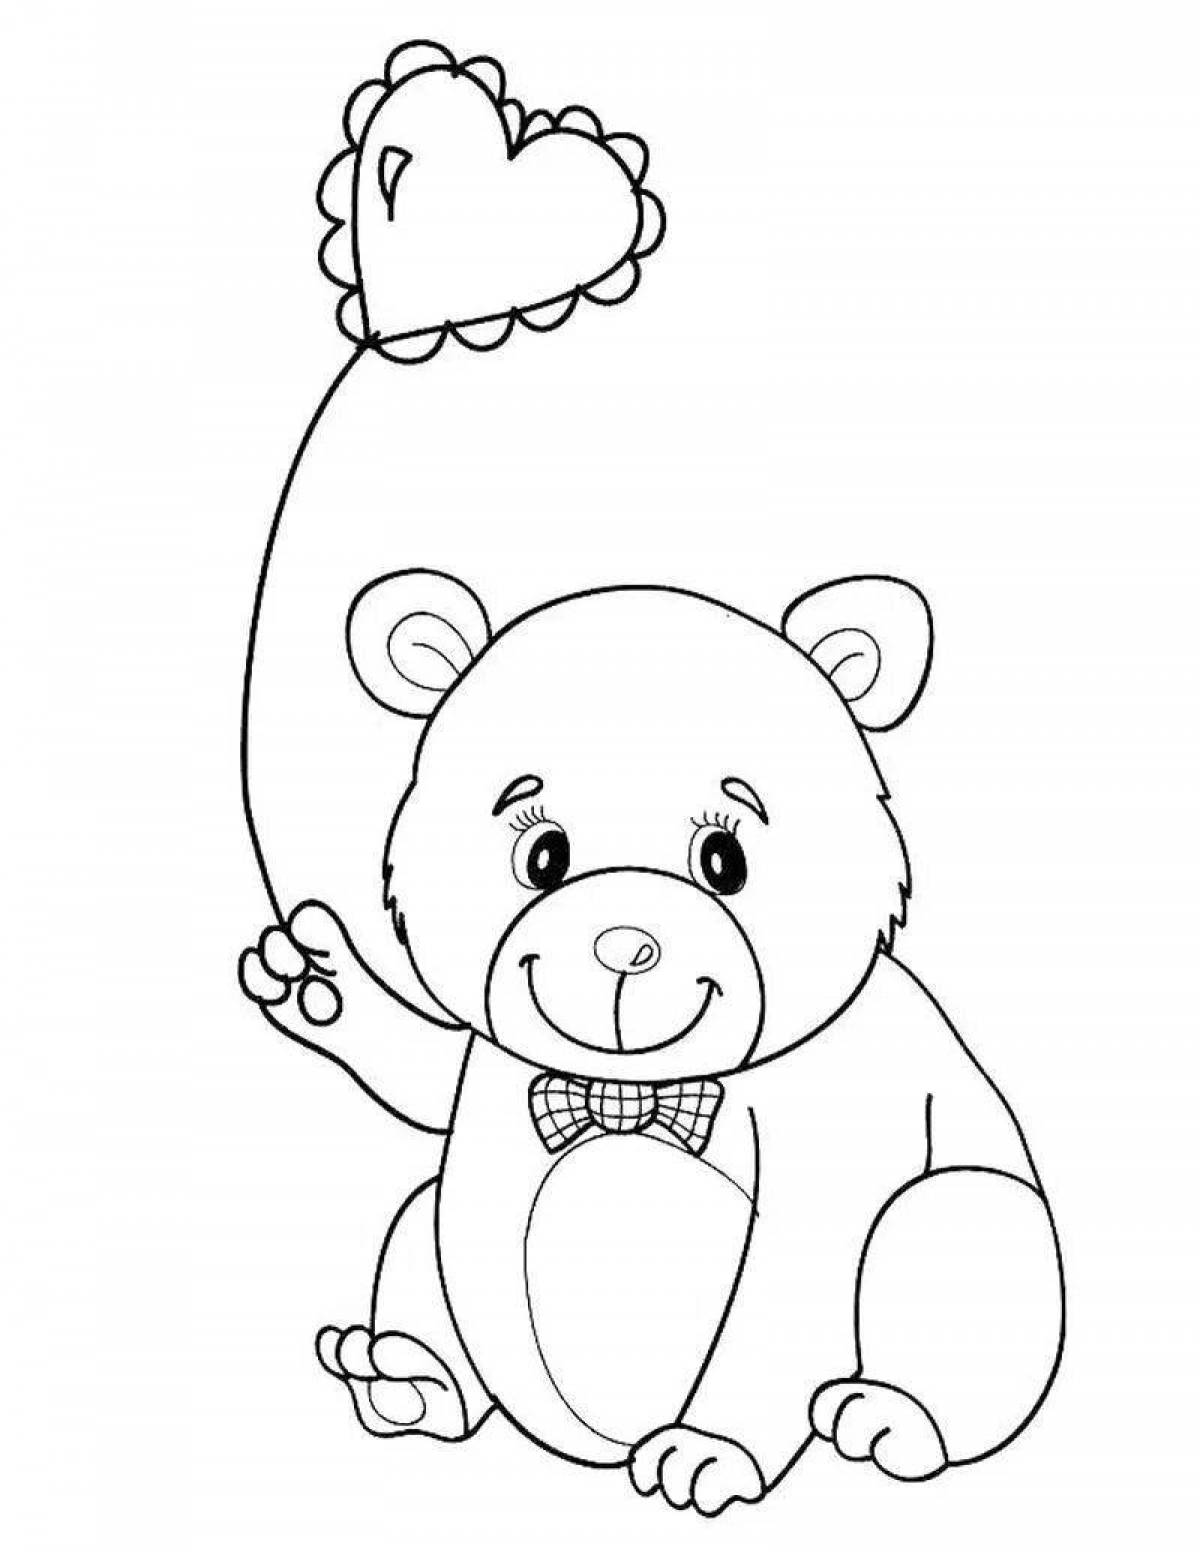 Outstanding bear coloring book for 5-6 year olds